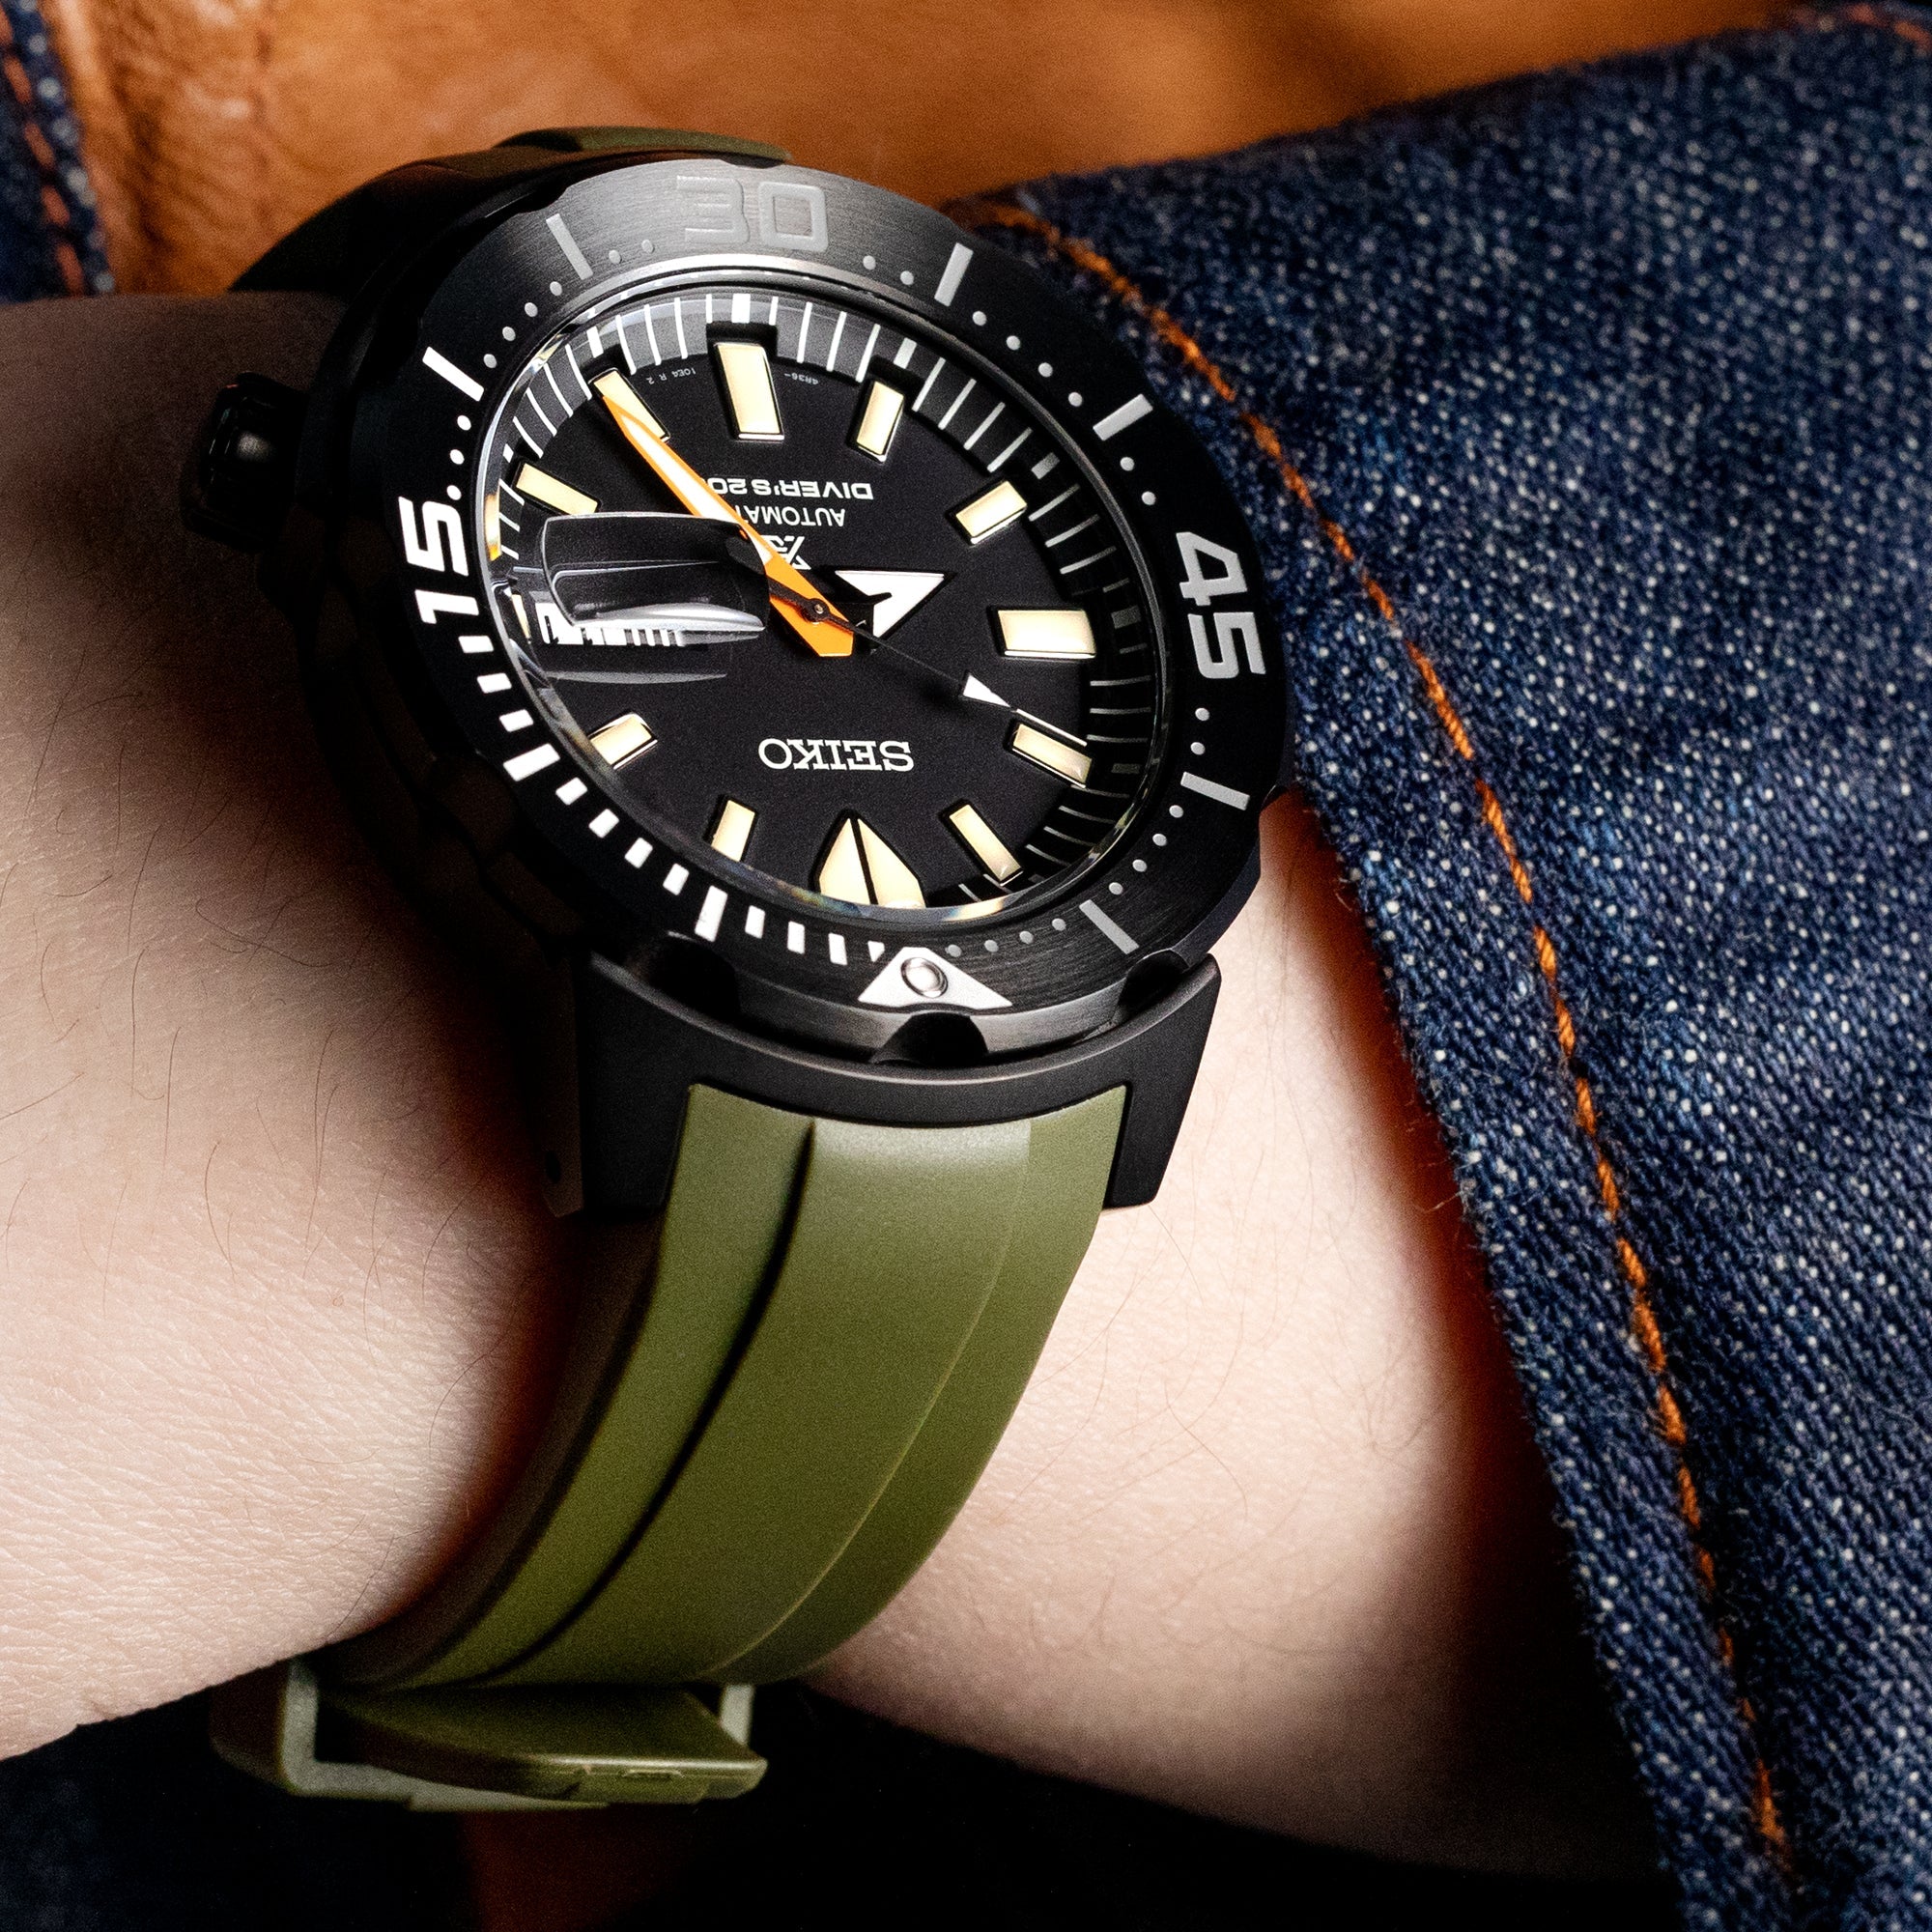 StrapXPro Lite - MX1A Rubber Strap for New Seiko Monster 4th Gen., Military Green Strapcode Watch Bands